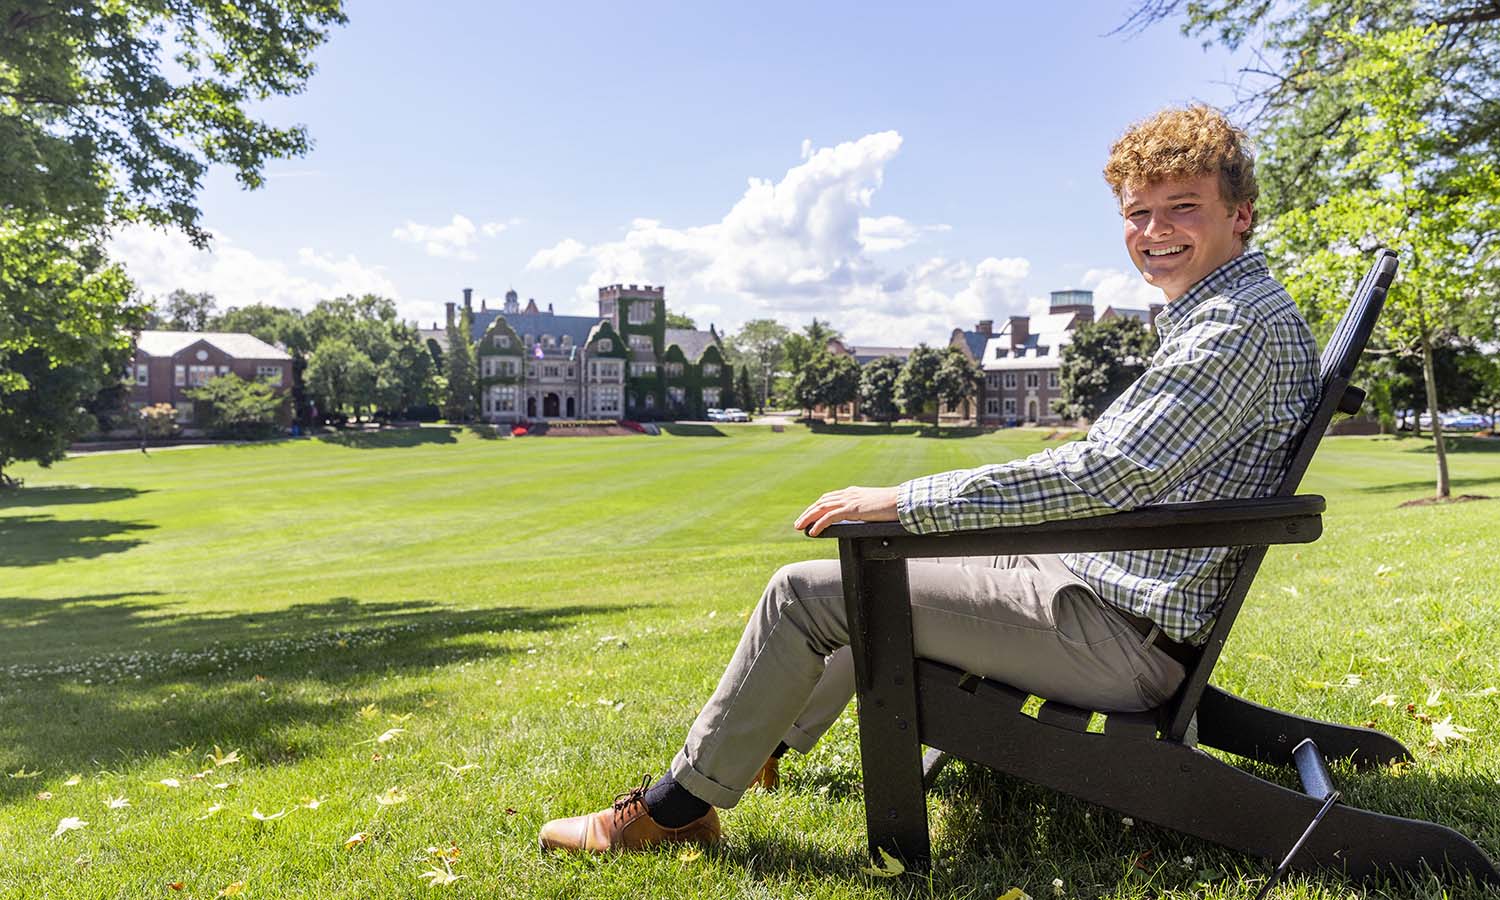 This week, we asked students to show us their favorite places on campus. Ryan Pero ’25 loves the view from the Adirondack chairs overlooking the Quad. Located near Merritt Hall where he takes most of his Education classes, he says, “You never know who you will see passing by. Plus, the view of Coxe Hall never gets old!”